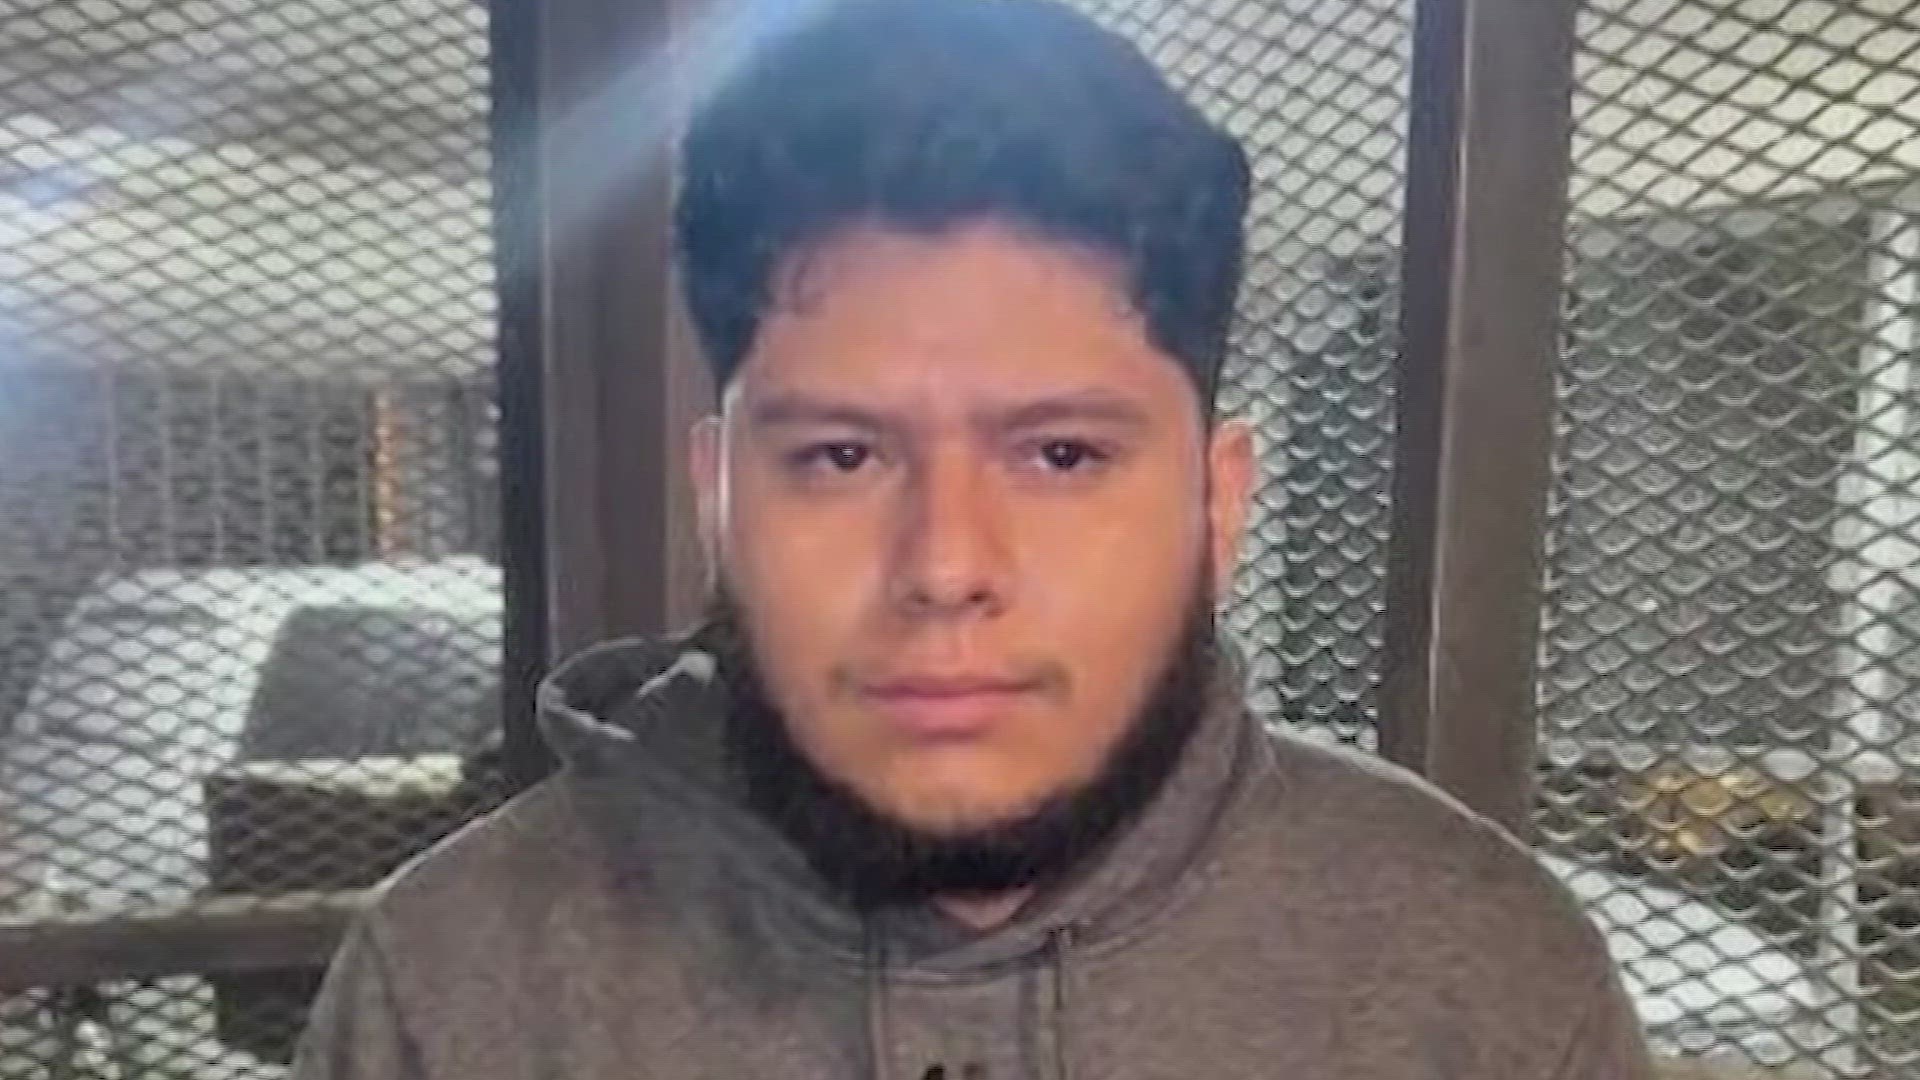 Texas Rangers arrested Rafael Govea Romero in Schulenburg, Texas and charged him with capital murder, according to the Edna Police Department.